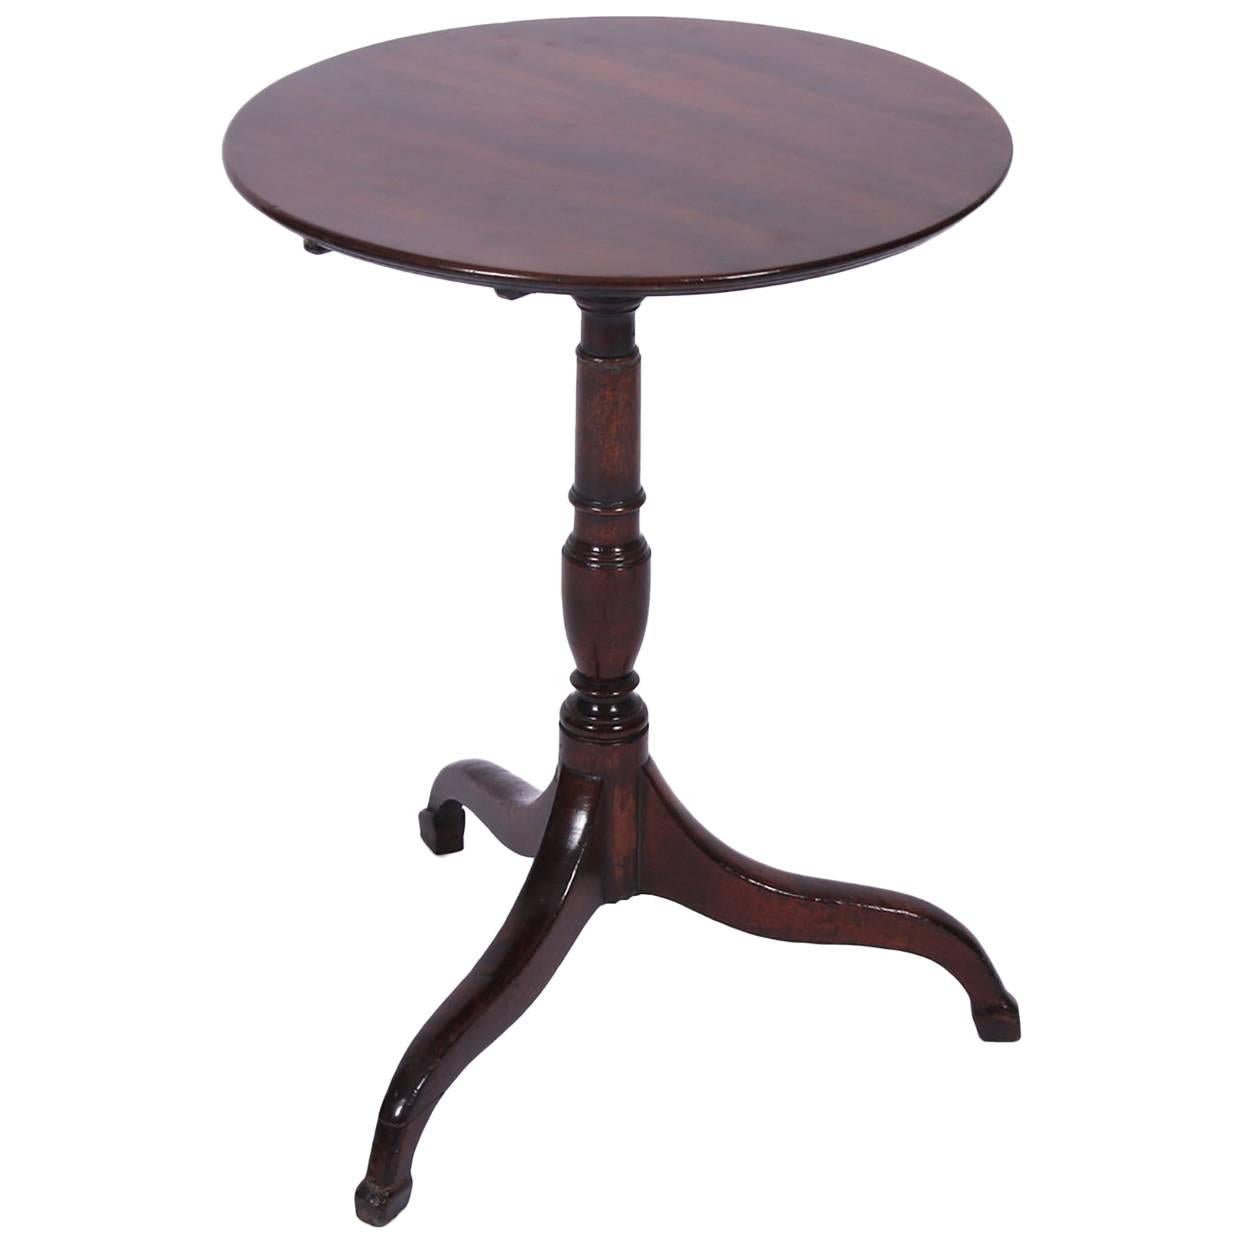 Small Mahogany Snap Top Table / Occasional Table, English, Early 19th Century